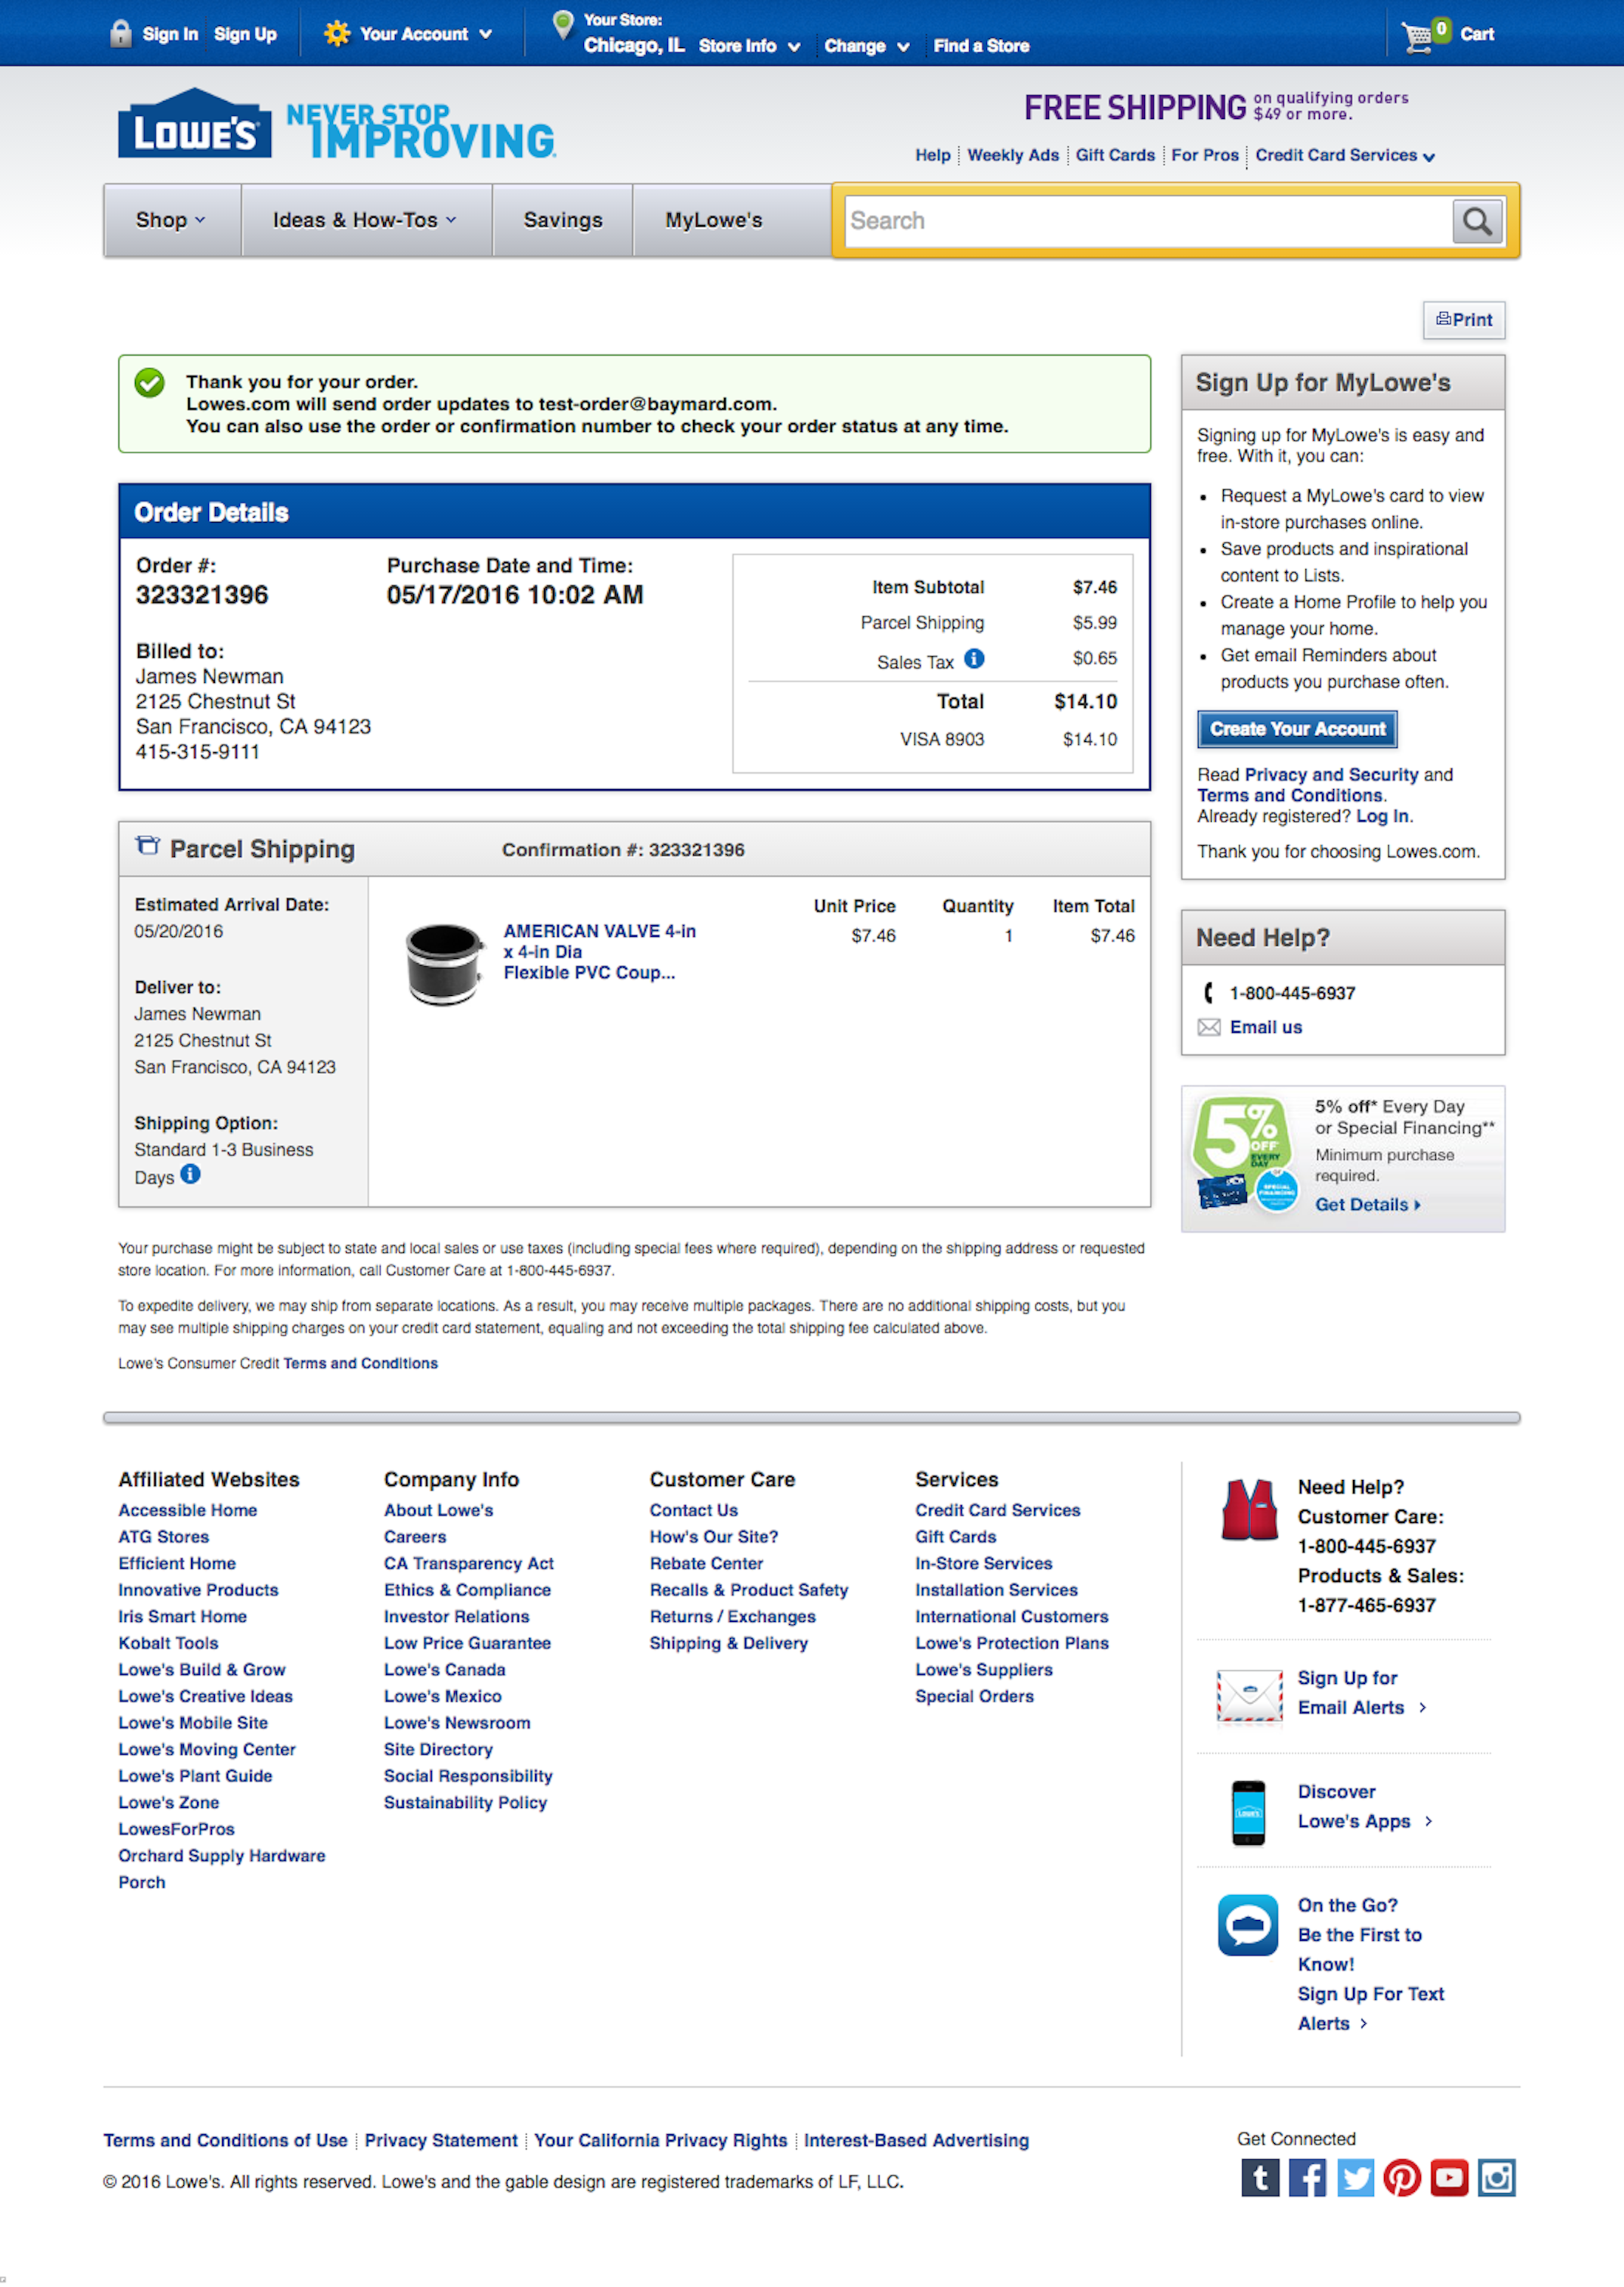 Lowe s Receipt Order Confirmation 429 Of 504 Receipt Order Confirmation Examples Baymard